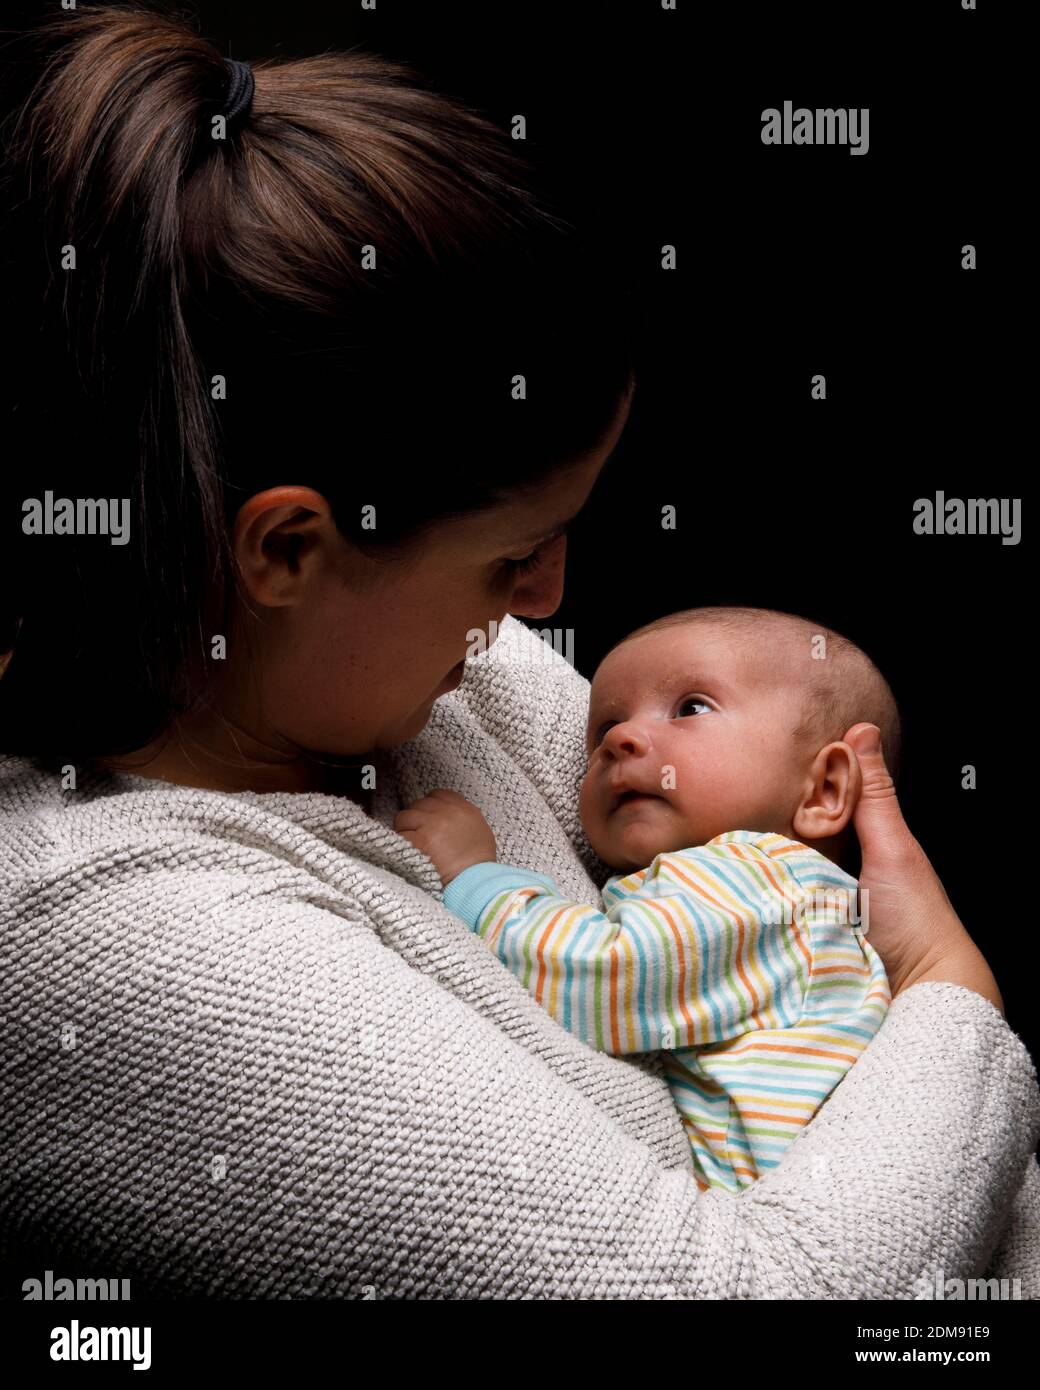 Side view of happy mom cuddling adorable newborn baby and enjoying moments of motherhood against black background Stock Photo